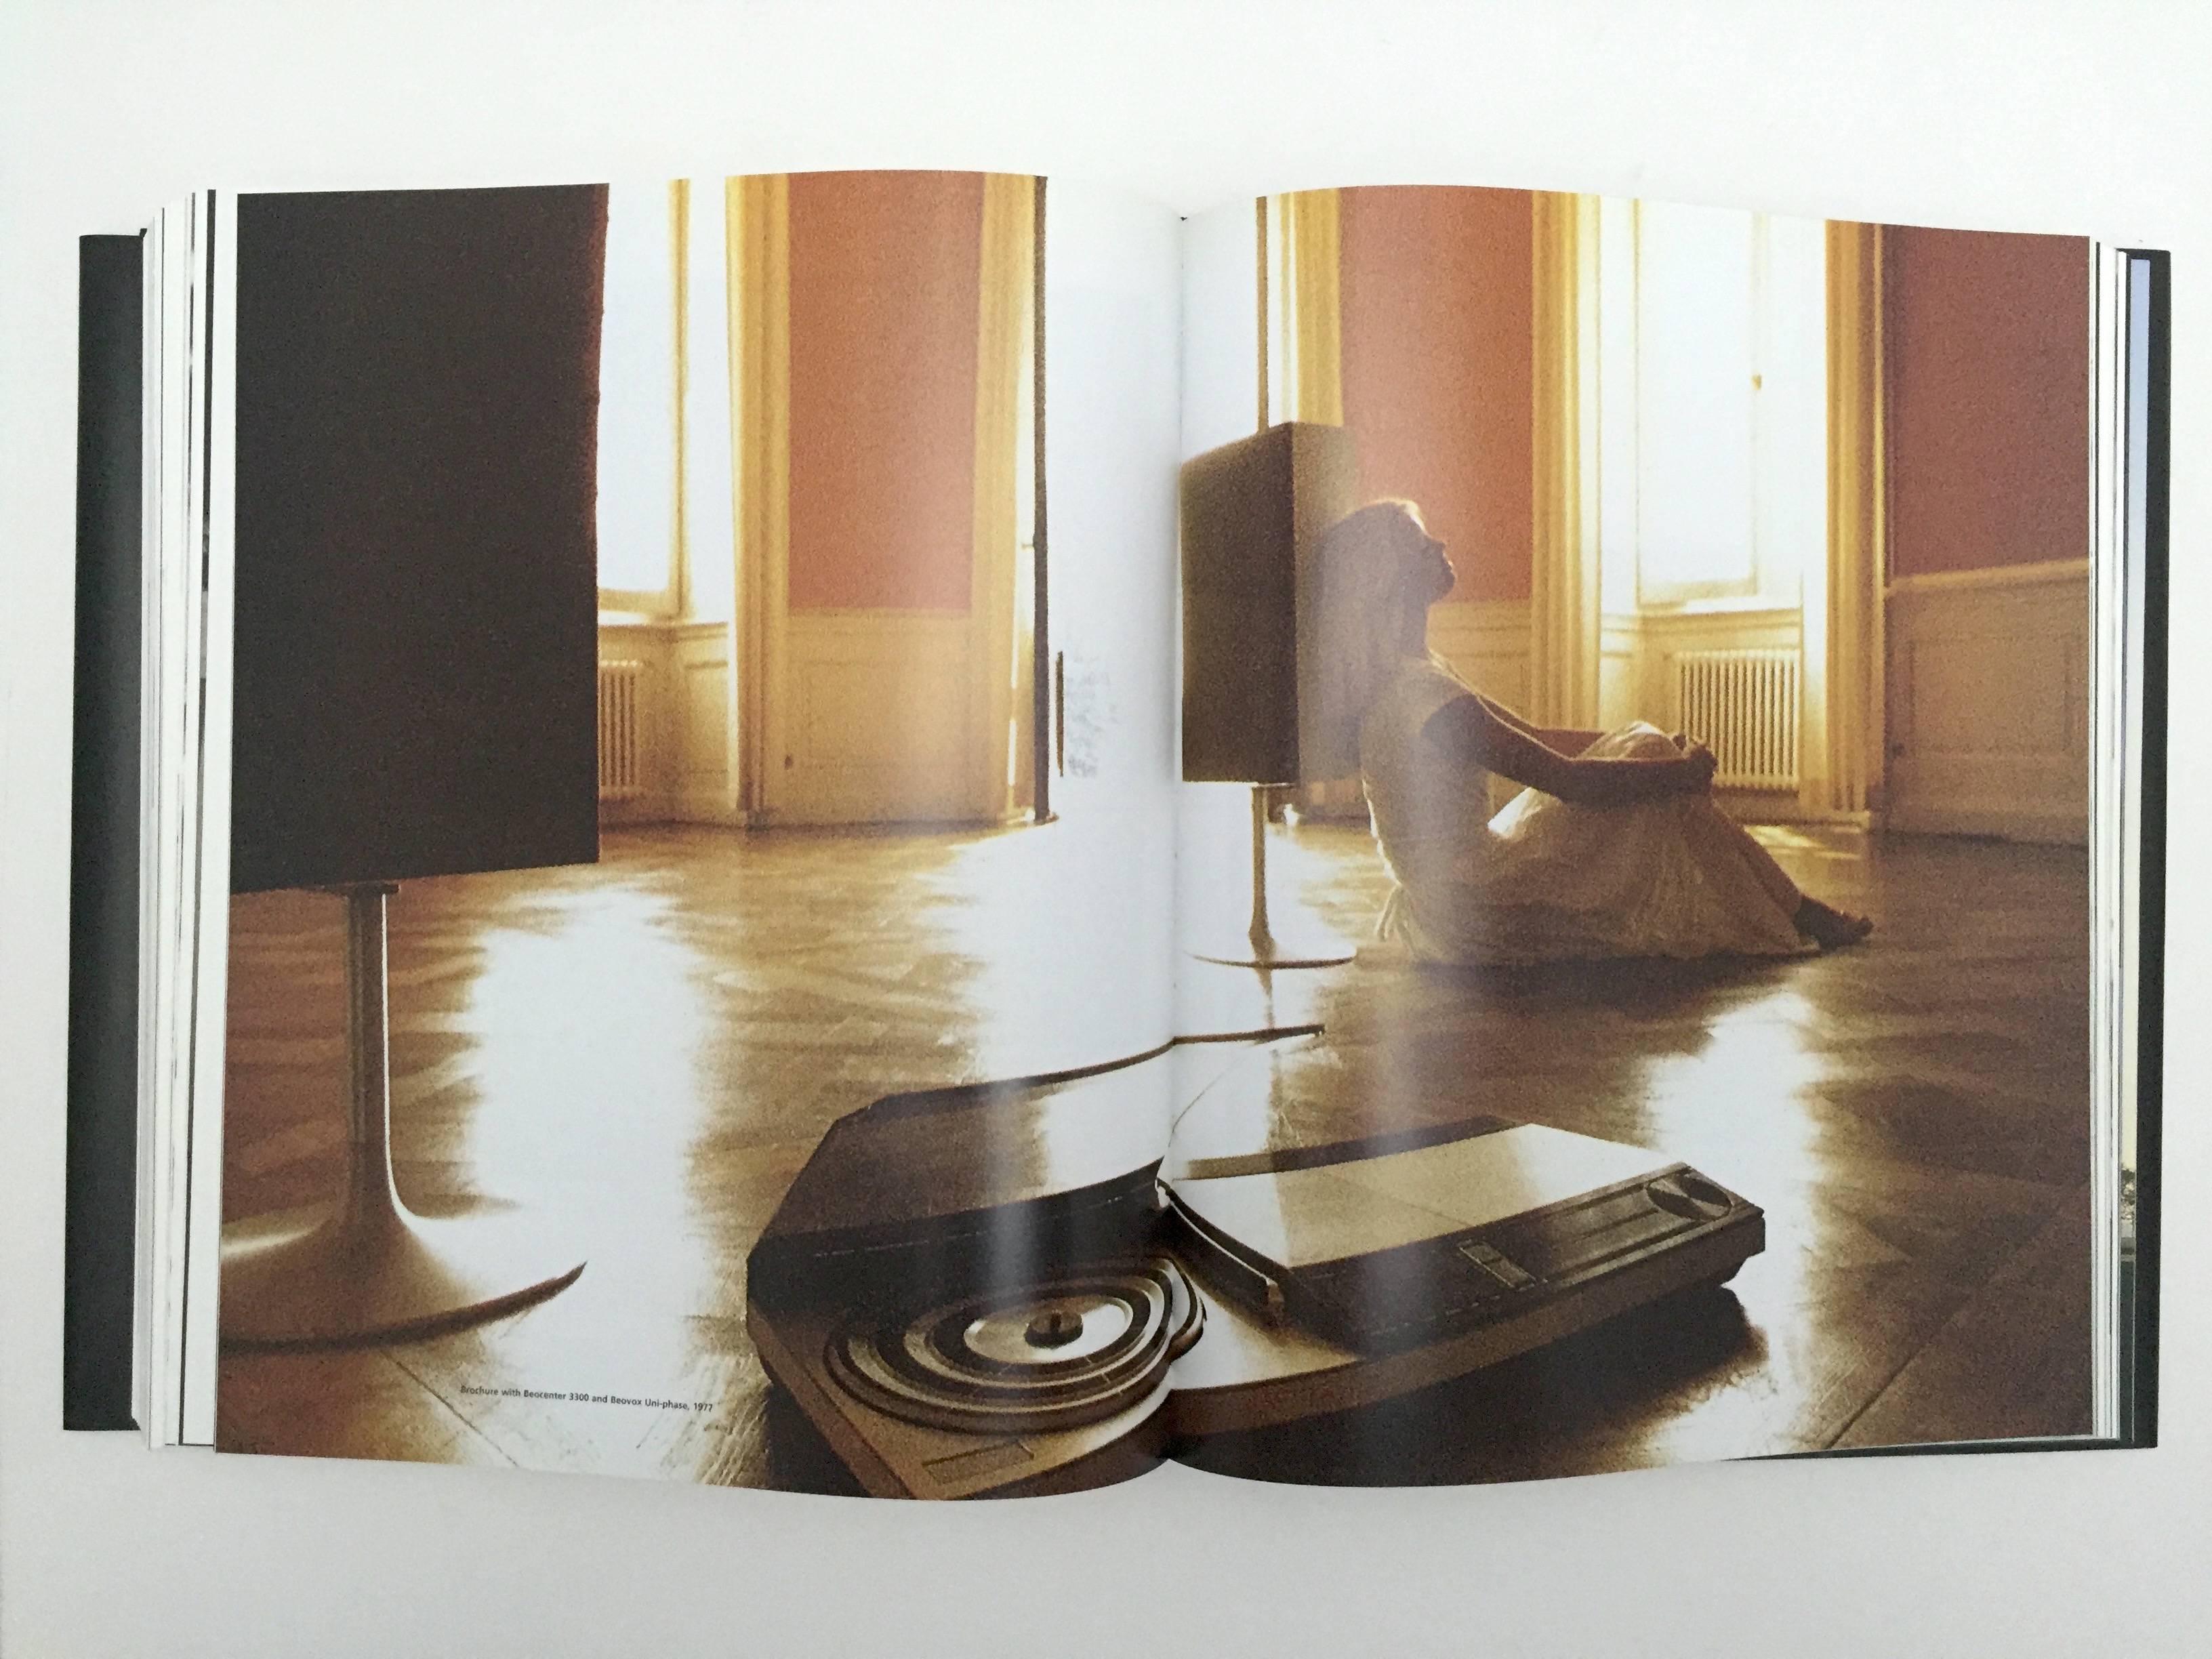 Bang & Olufsen from Vision to Legend, Jens Bang - 2003 6